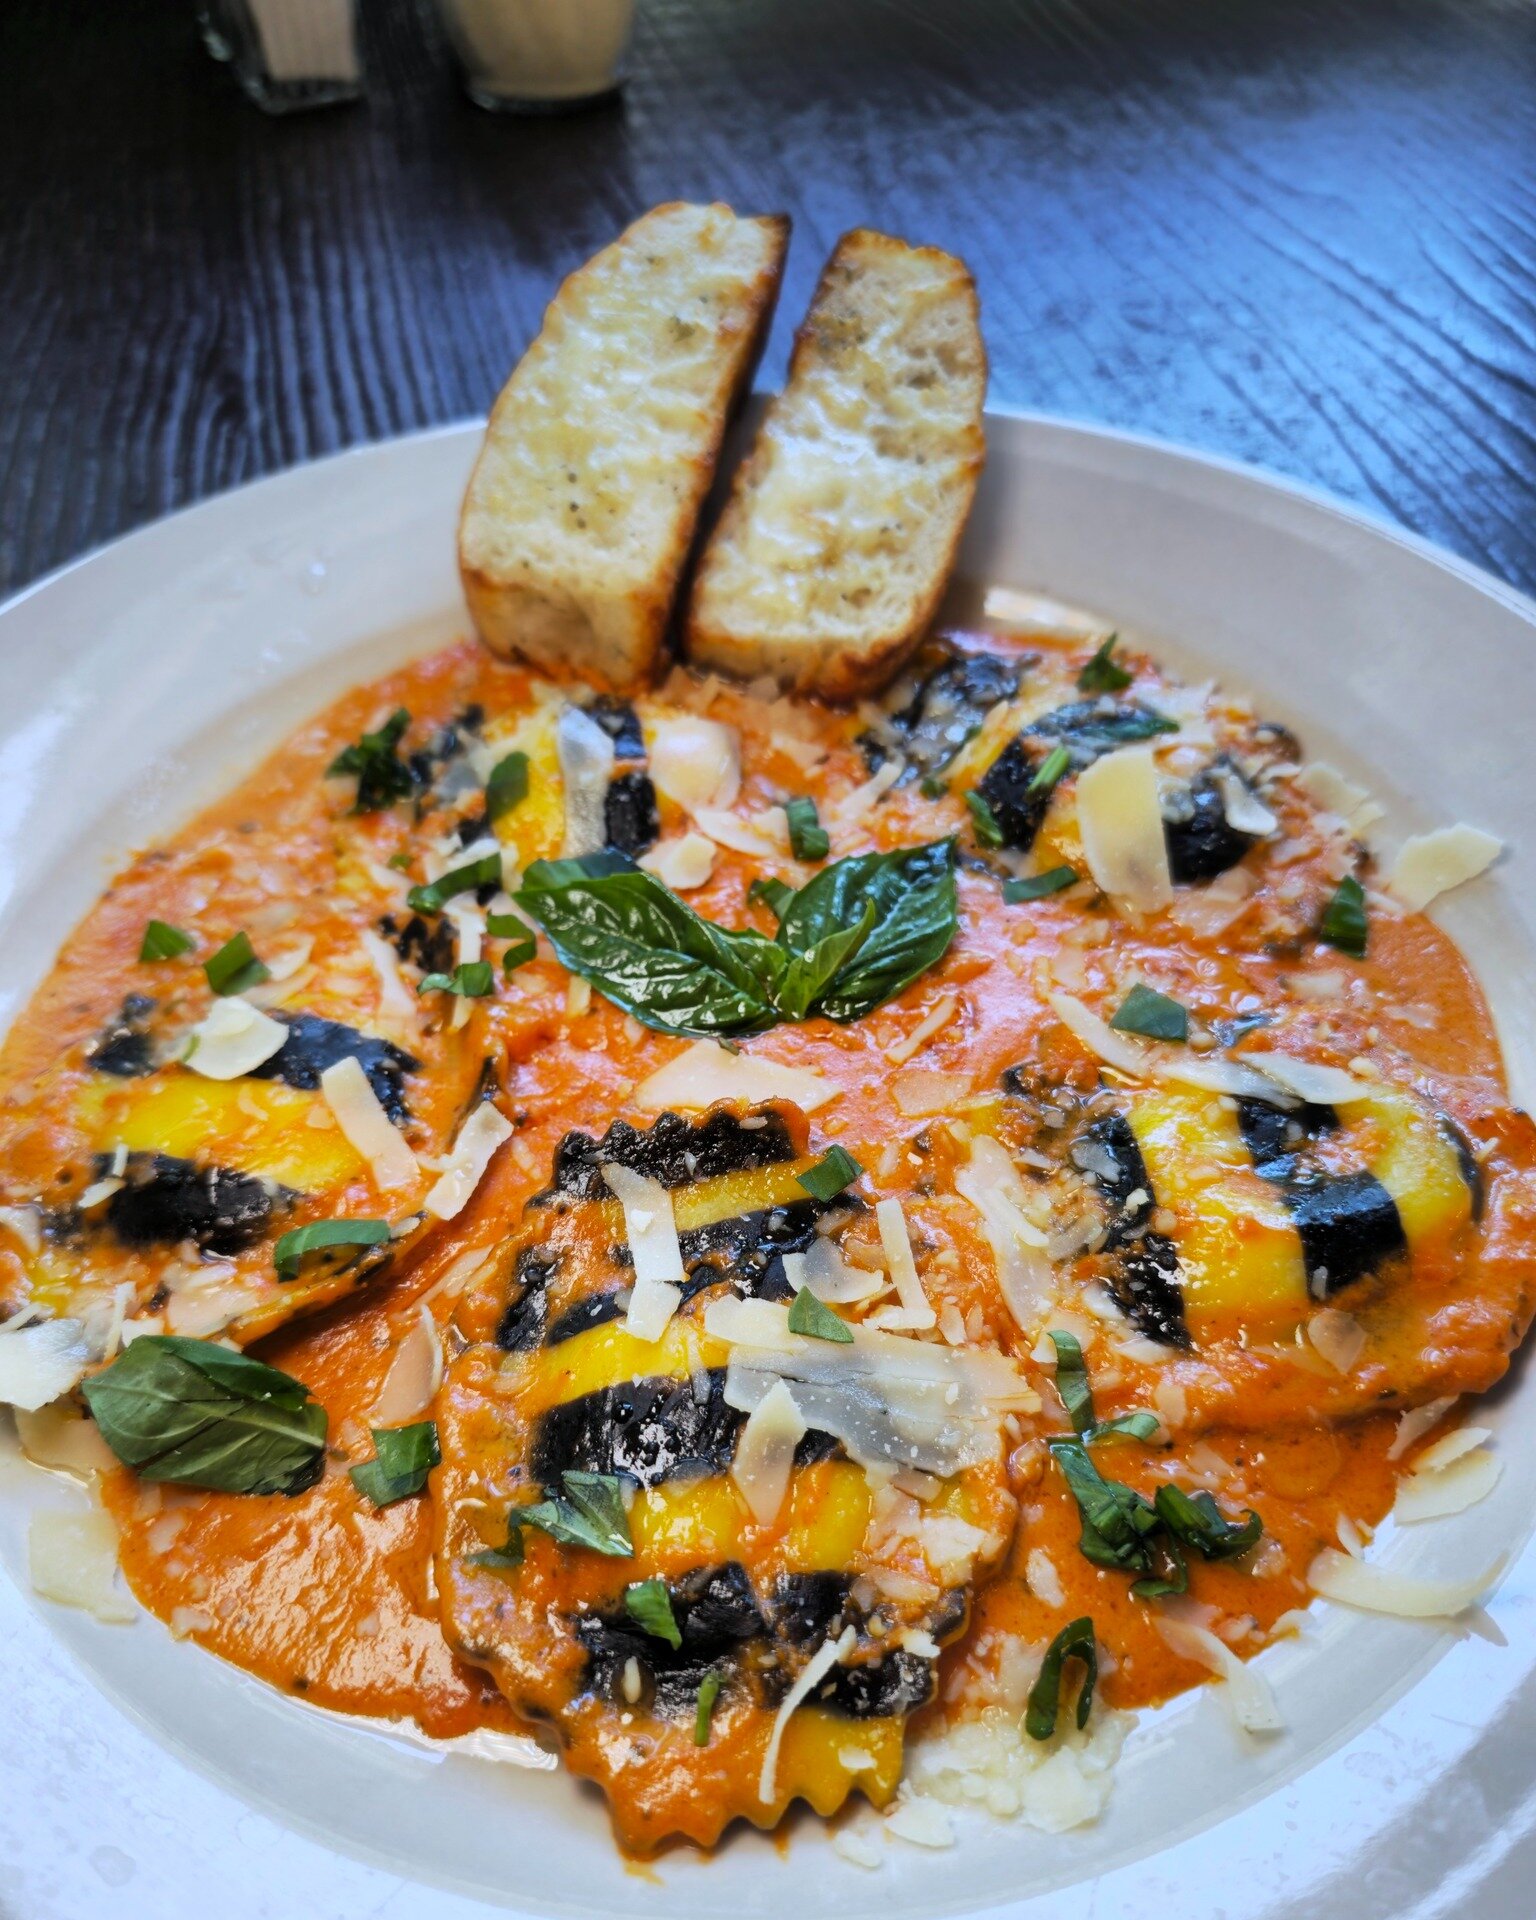 🦞 Run, don't walk- Lobster Ravioli with Squid Ink + Vodka Sauce is tonight's dinner special at Arte! Limited quantities are available, so get it while it lasts!
 
#lobsterravioli #italianfood #ShrimpFestival #shrimpfest #visitameliaisland #eatamelia